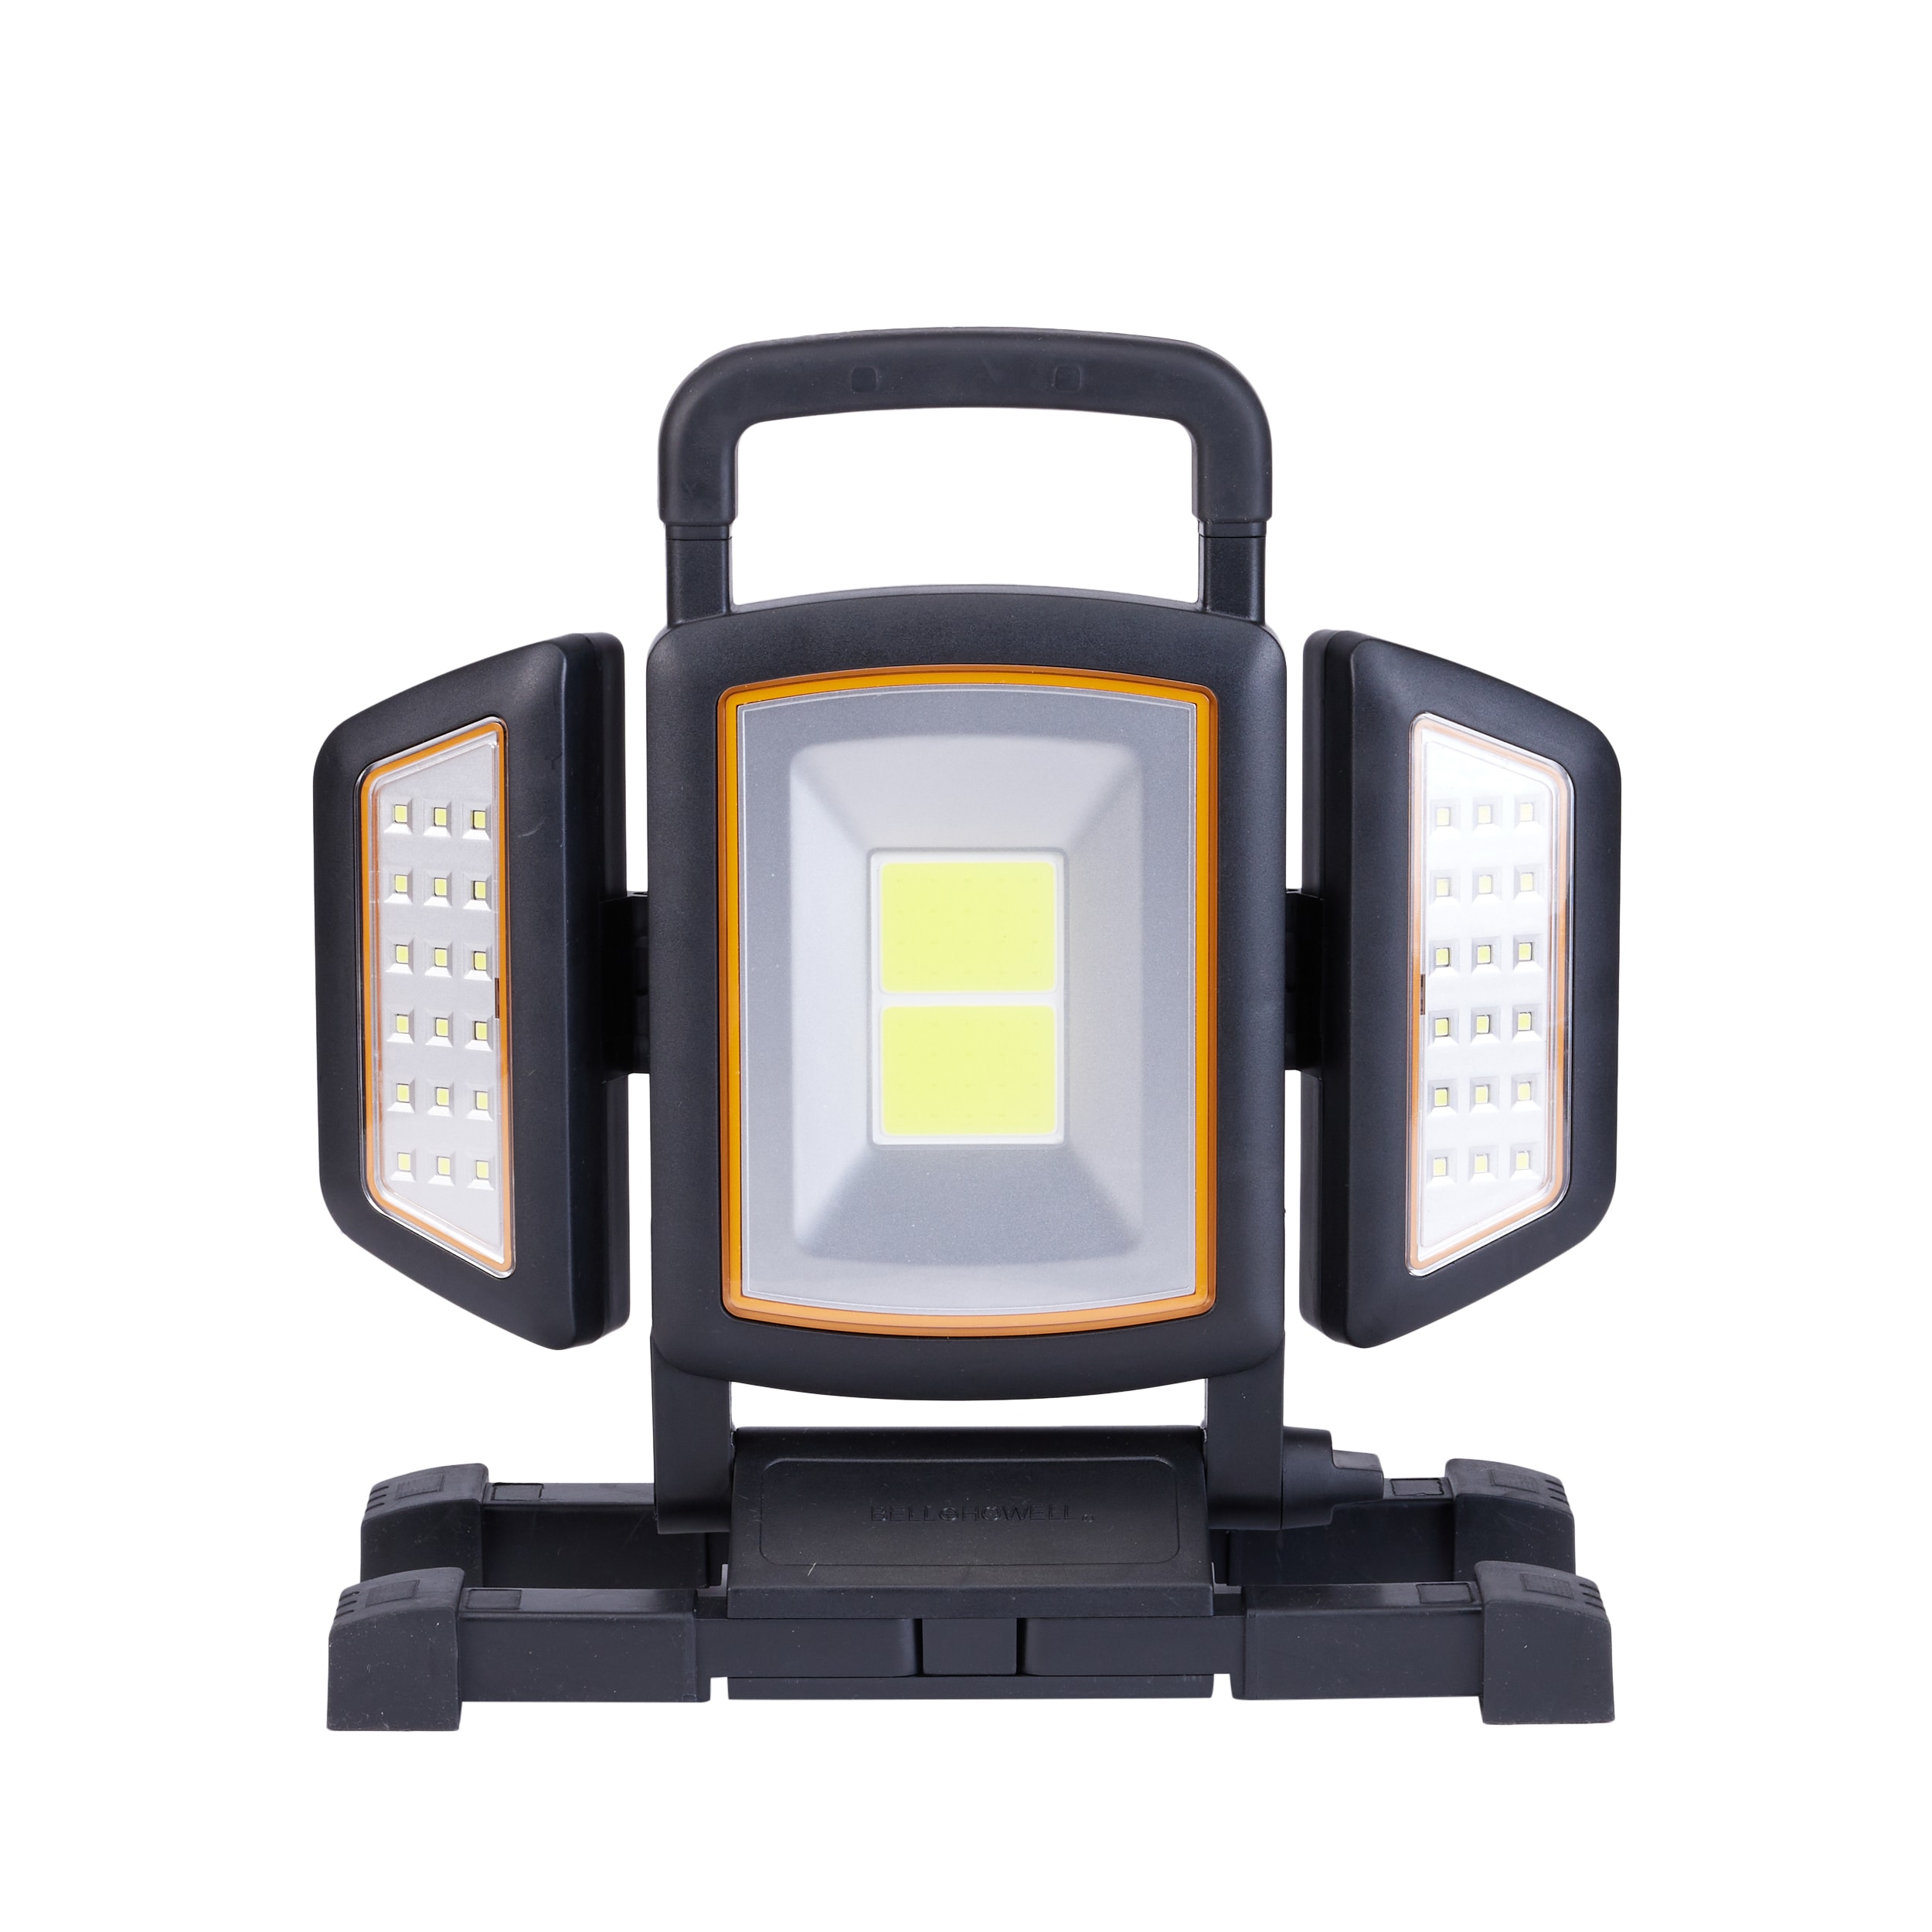 Bell and Howell Bionic Portable LED Worklight 750 Lumens Rechargeable Work  Light